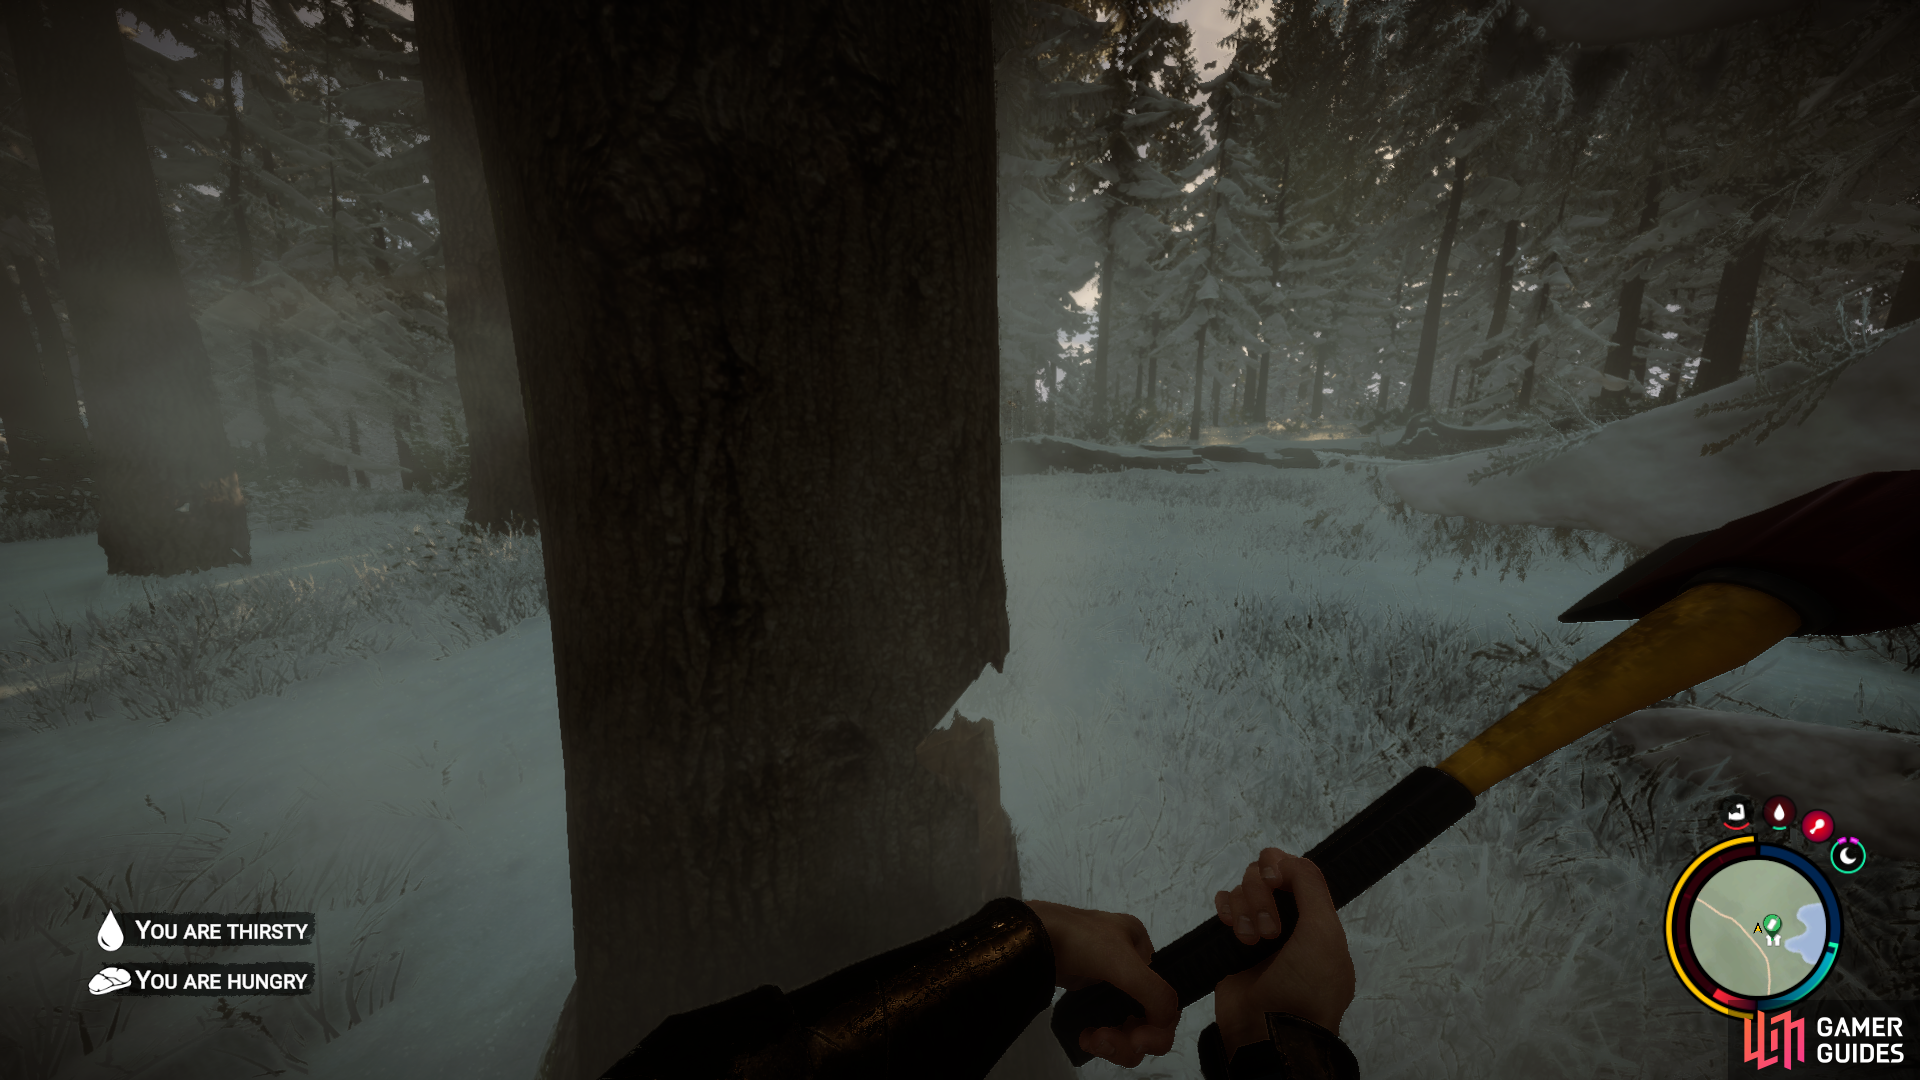 The Firefighter Axe will cut down trees faster.